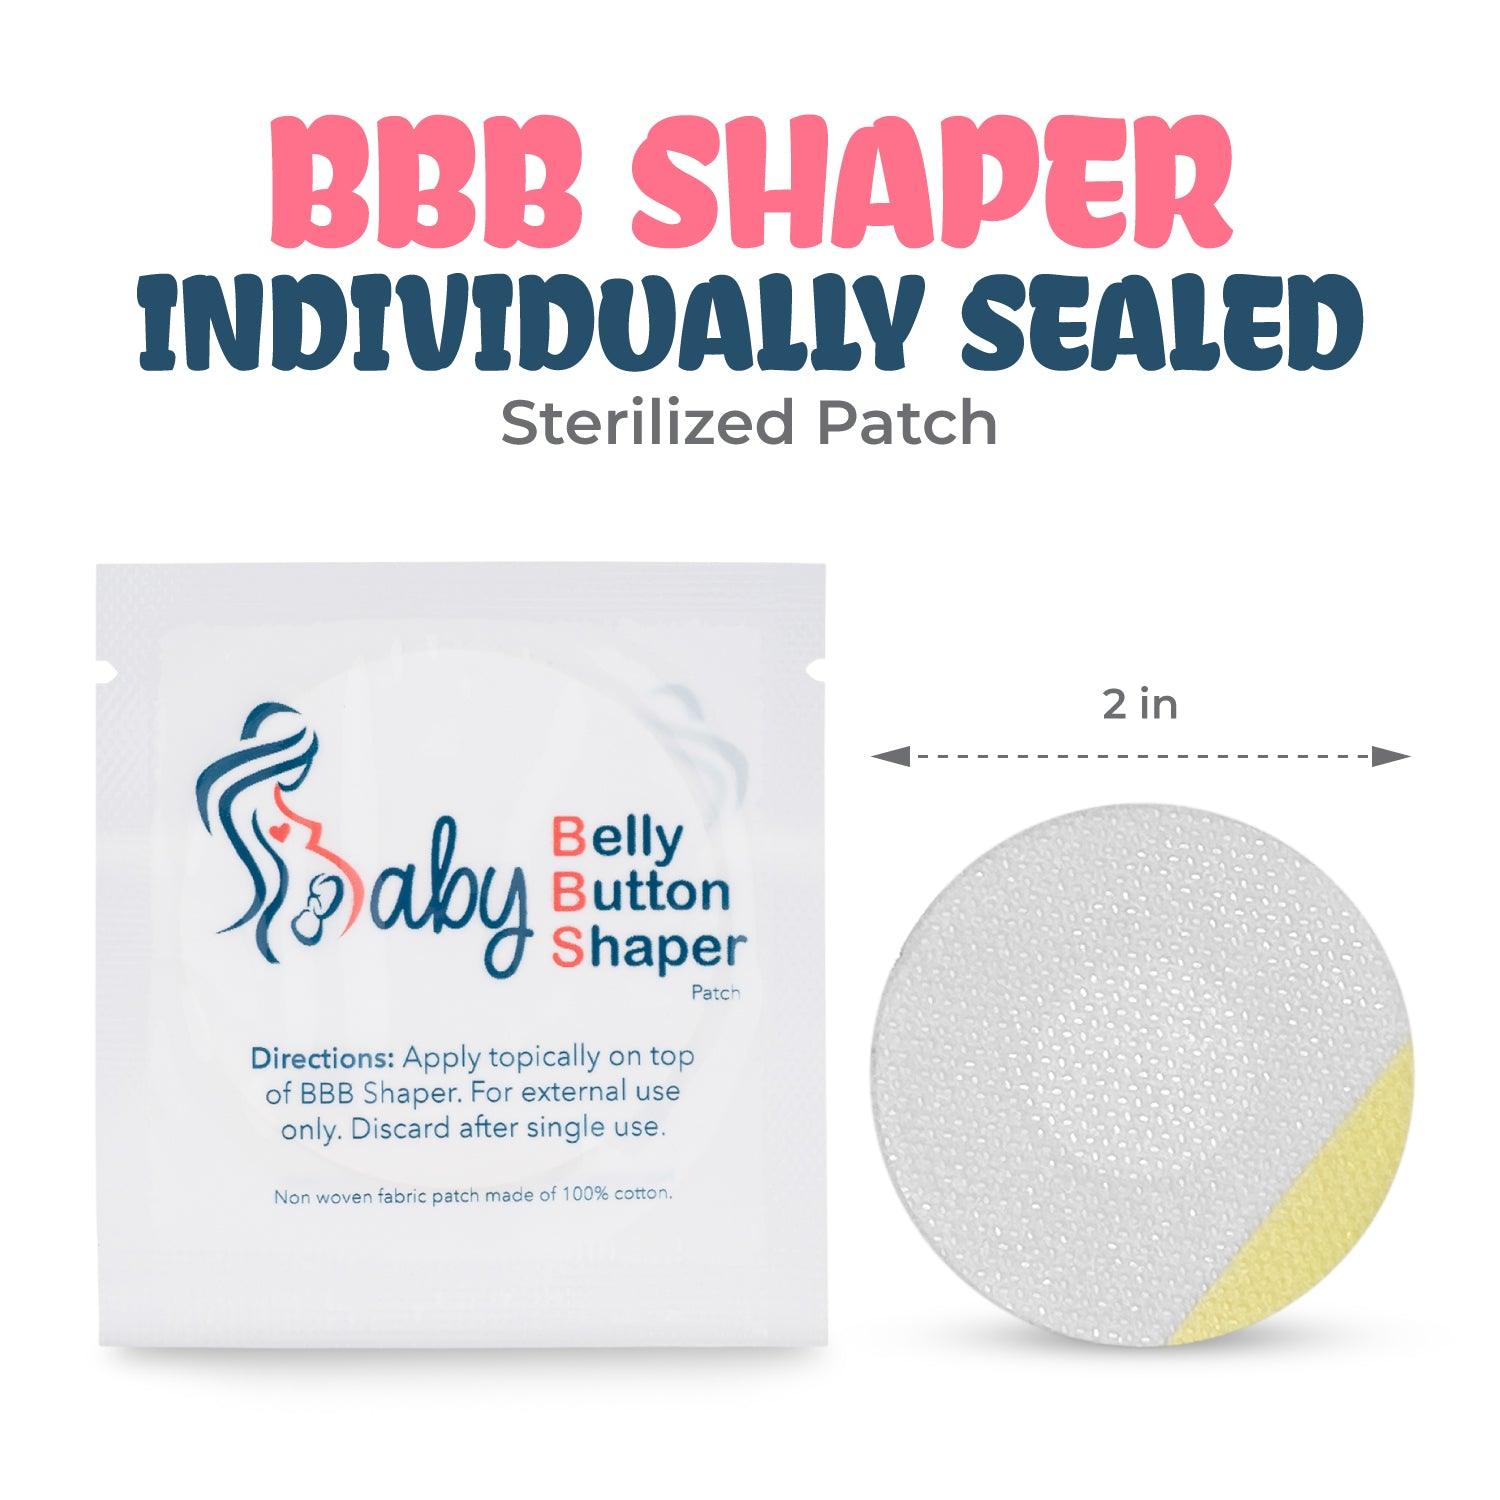 About Us – Baby Belly Button Shaper